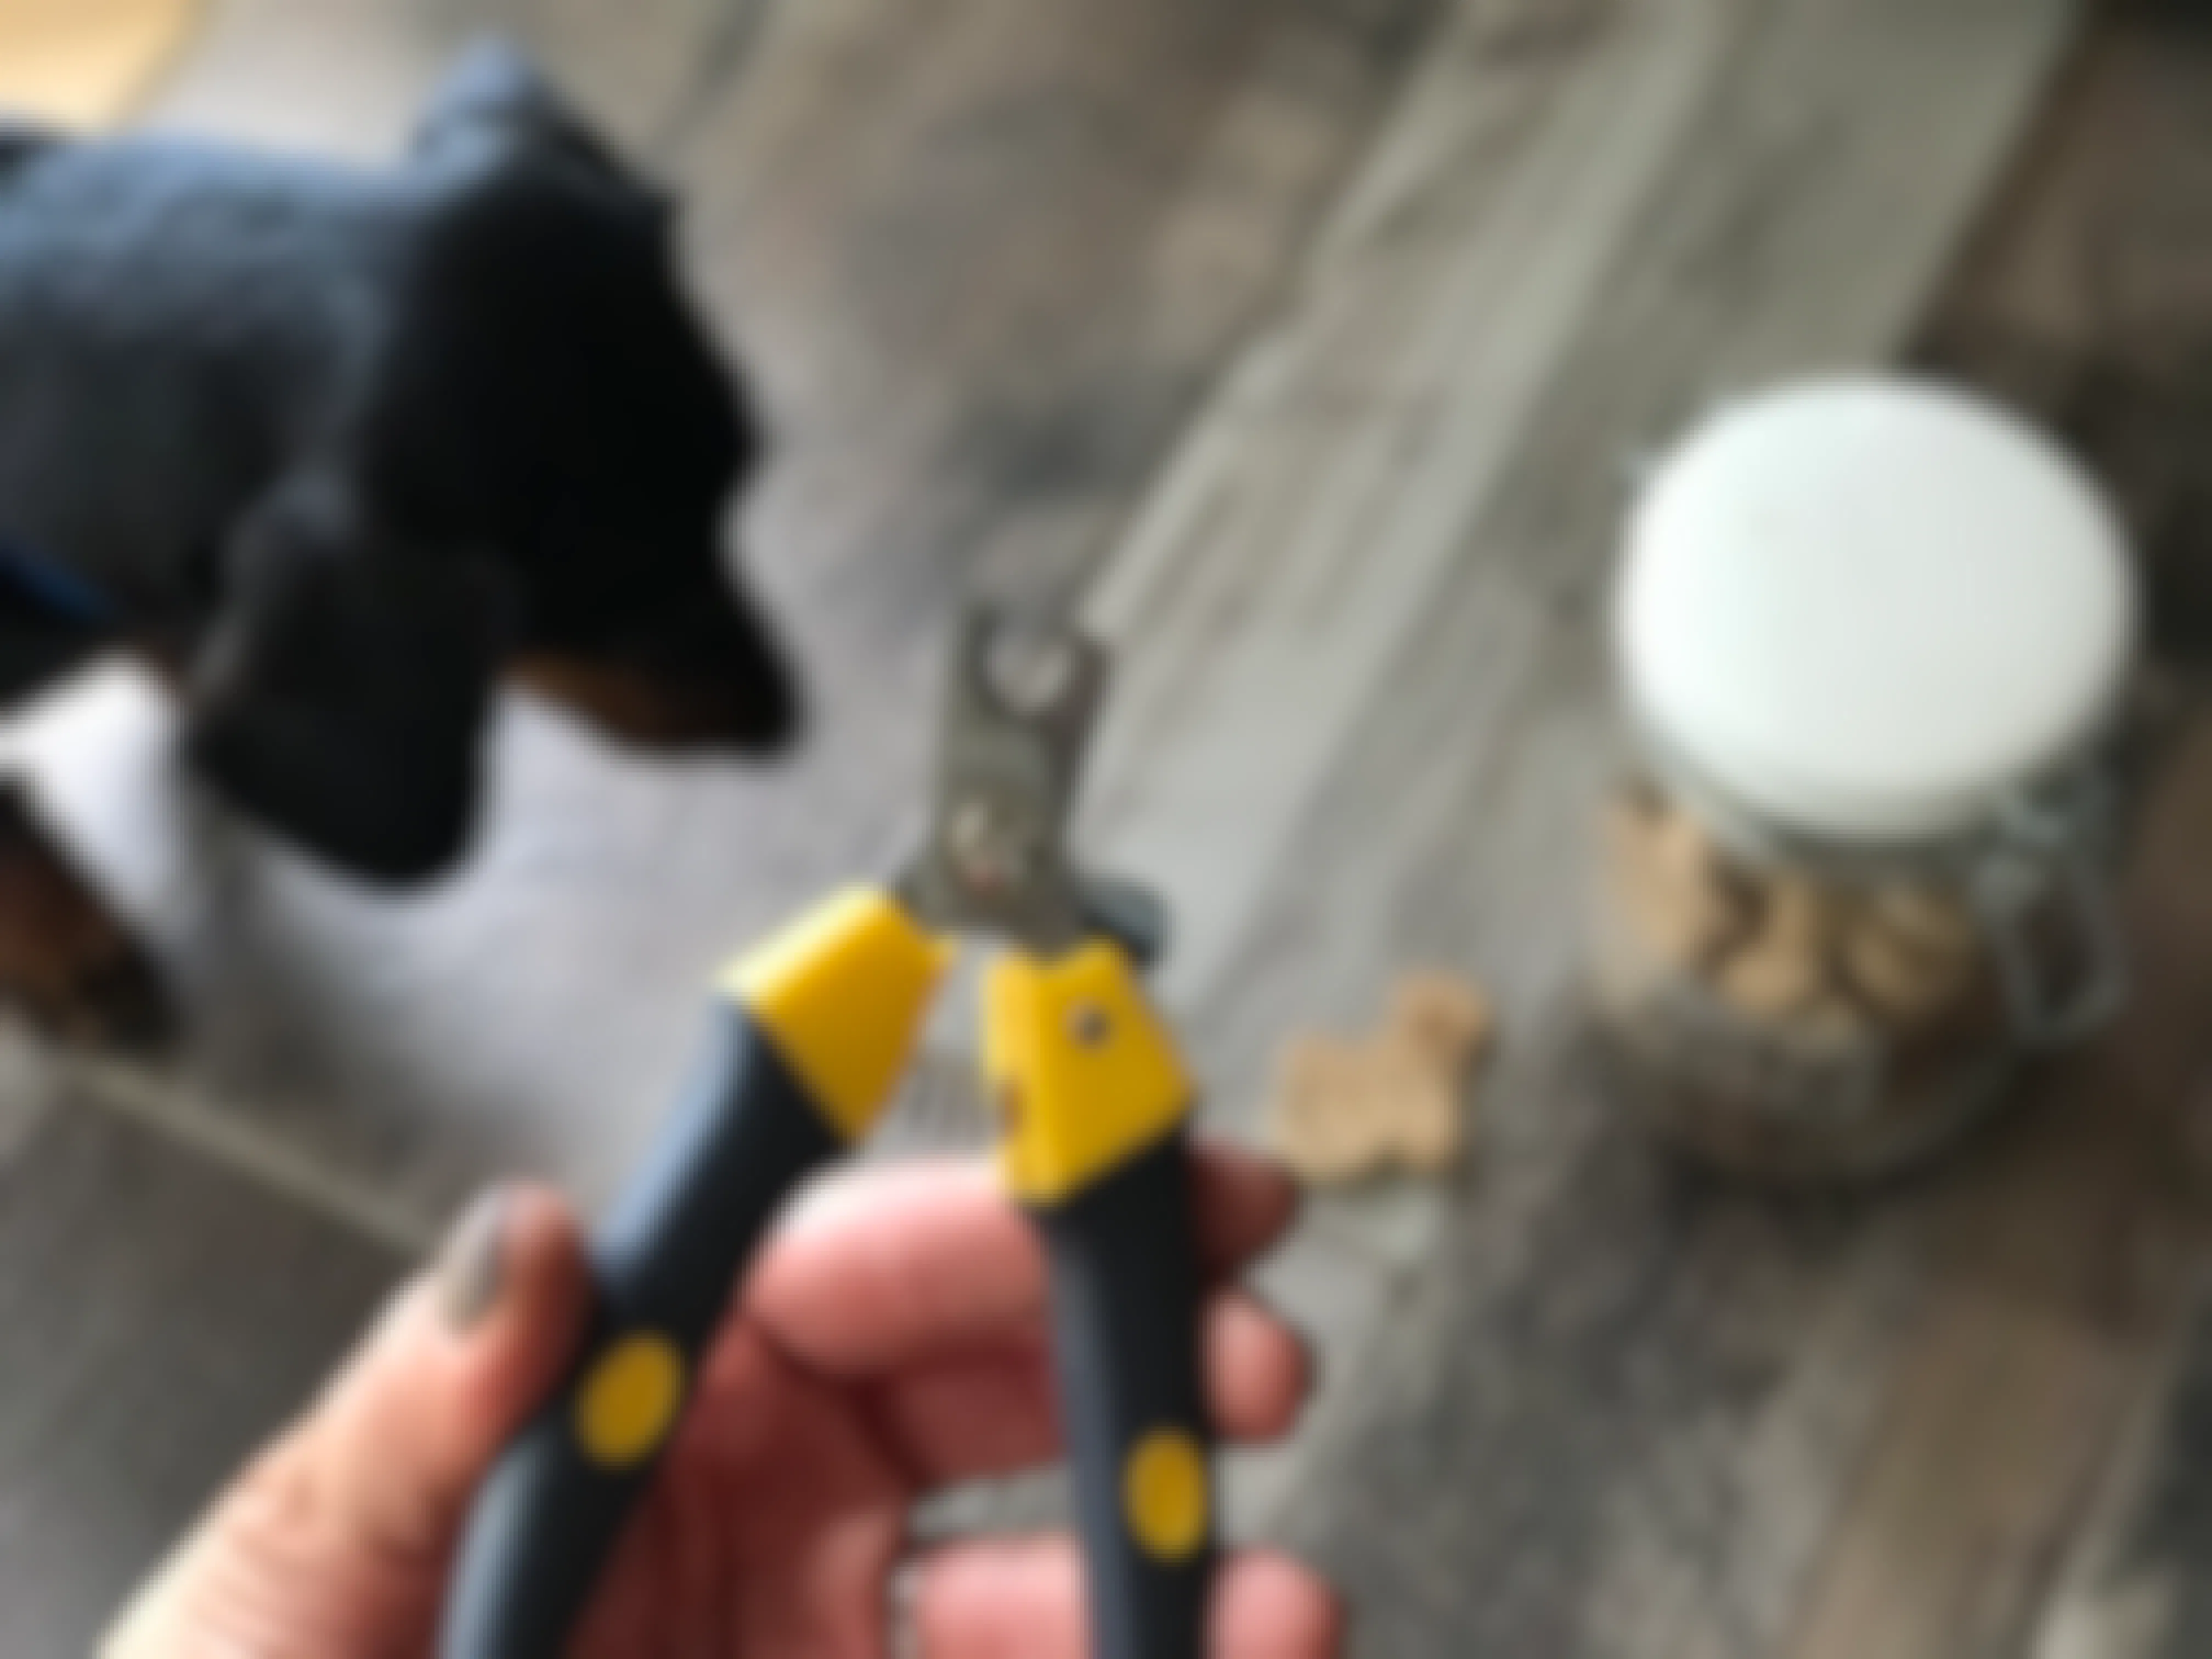 A person's hand holding a dog nail clipper with a dog and a jar of treats on the floor in the background.